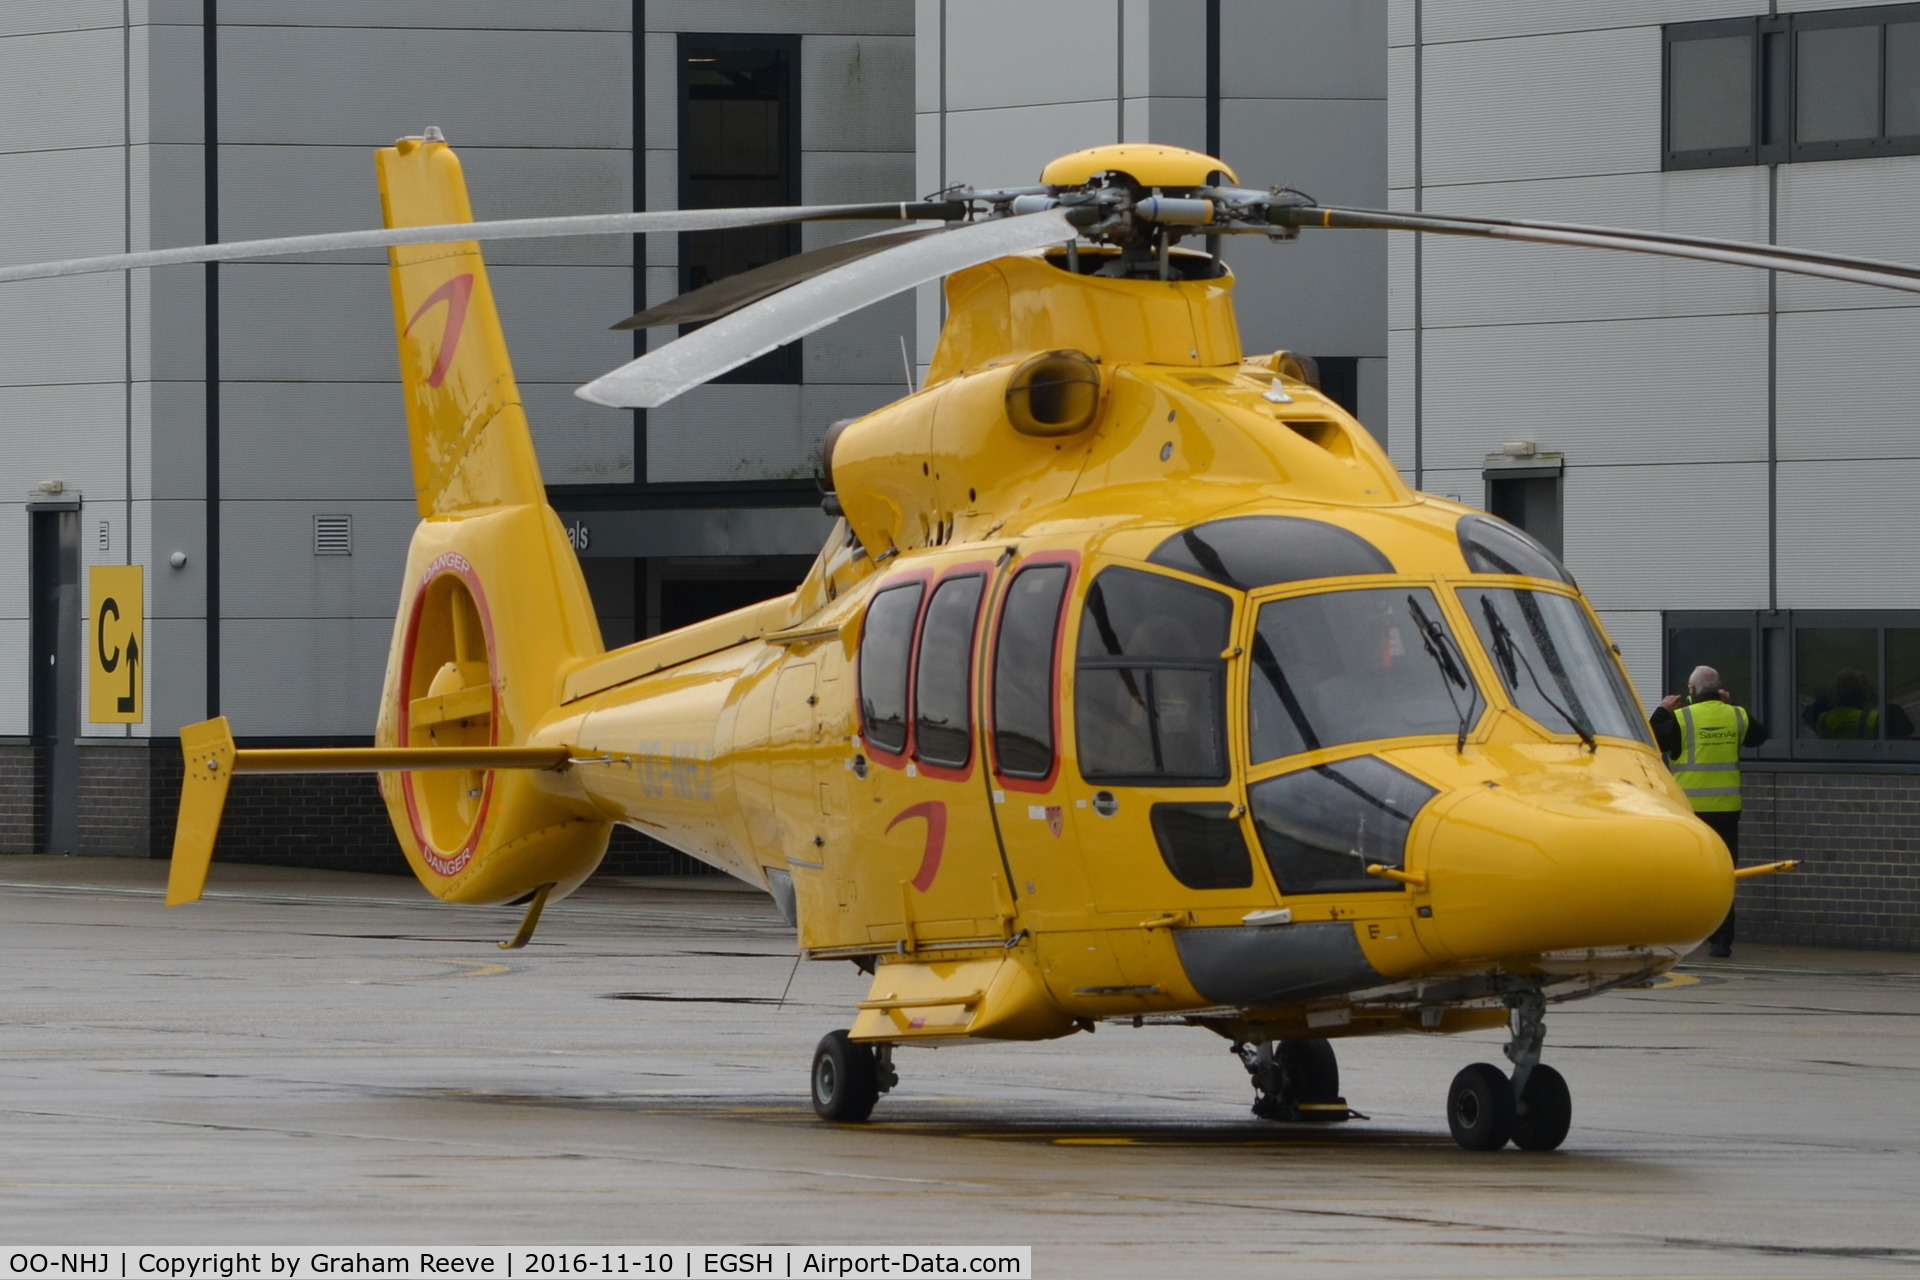 OO-NHJ, 2009 Eurocopter EC-155B-1 C/N 6842, Parked at Norwich with new NHV logo's.